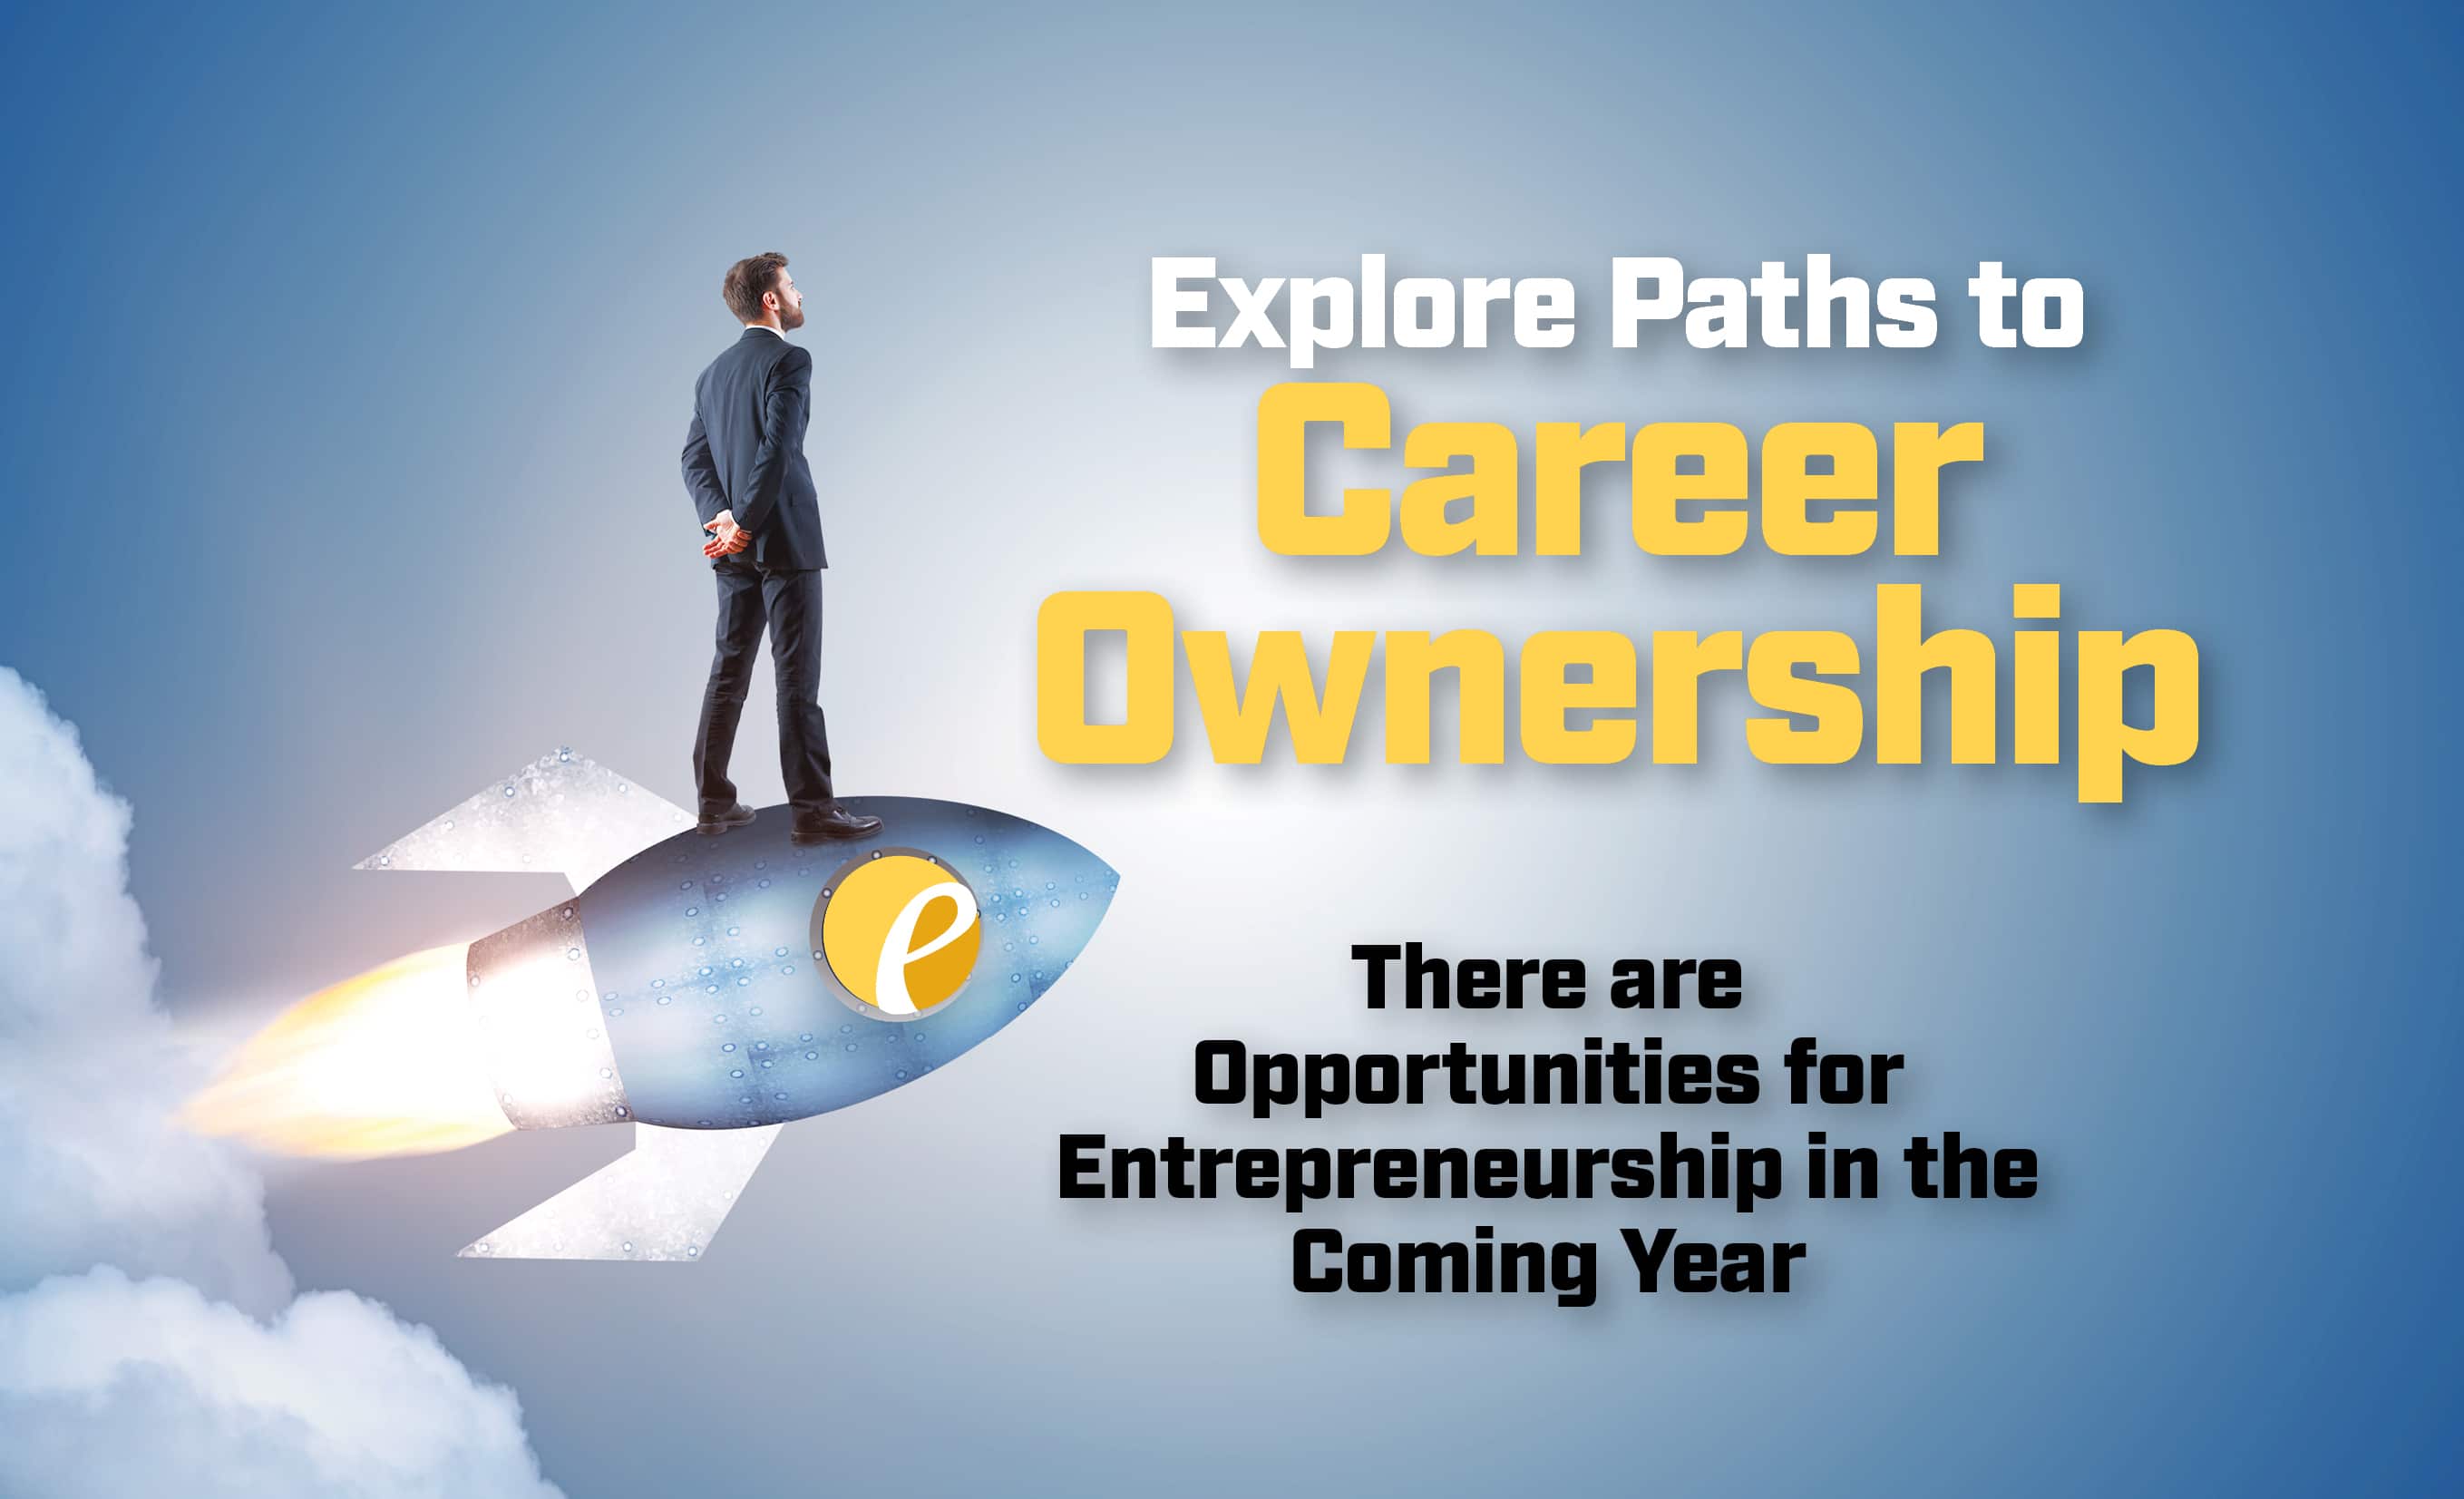 man in suit standing on a blue rocket with Explore Paths to Career Ownership text